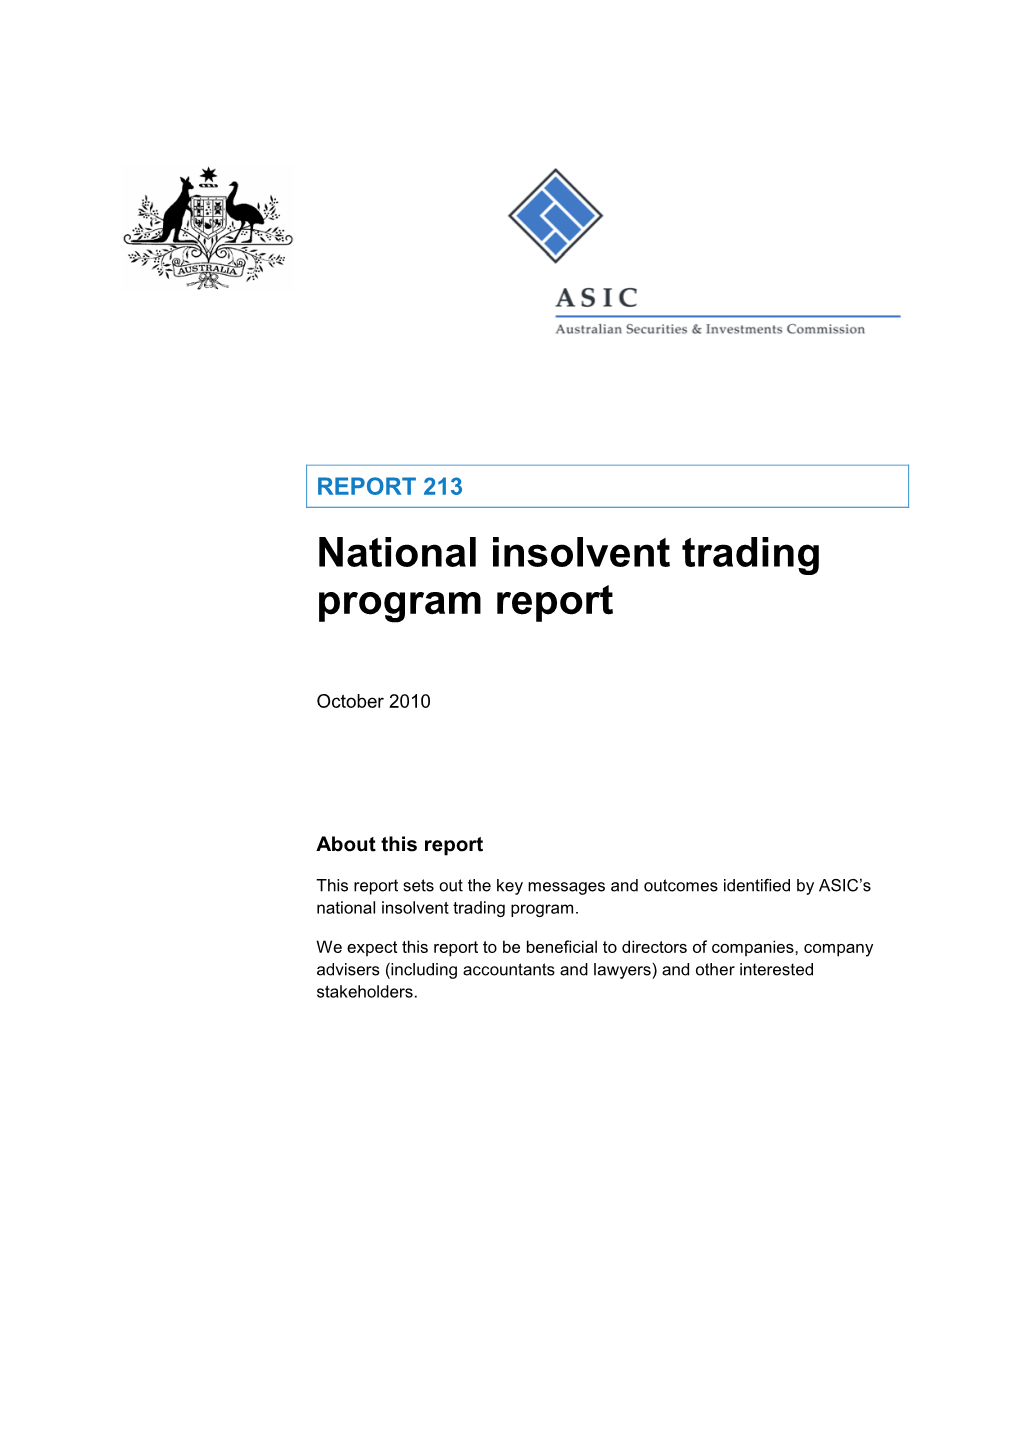 Report REP 213 National Insolvent Trading Program Report